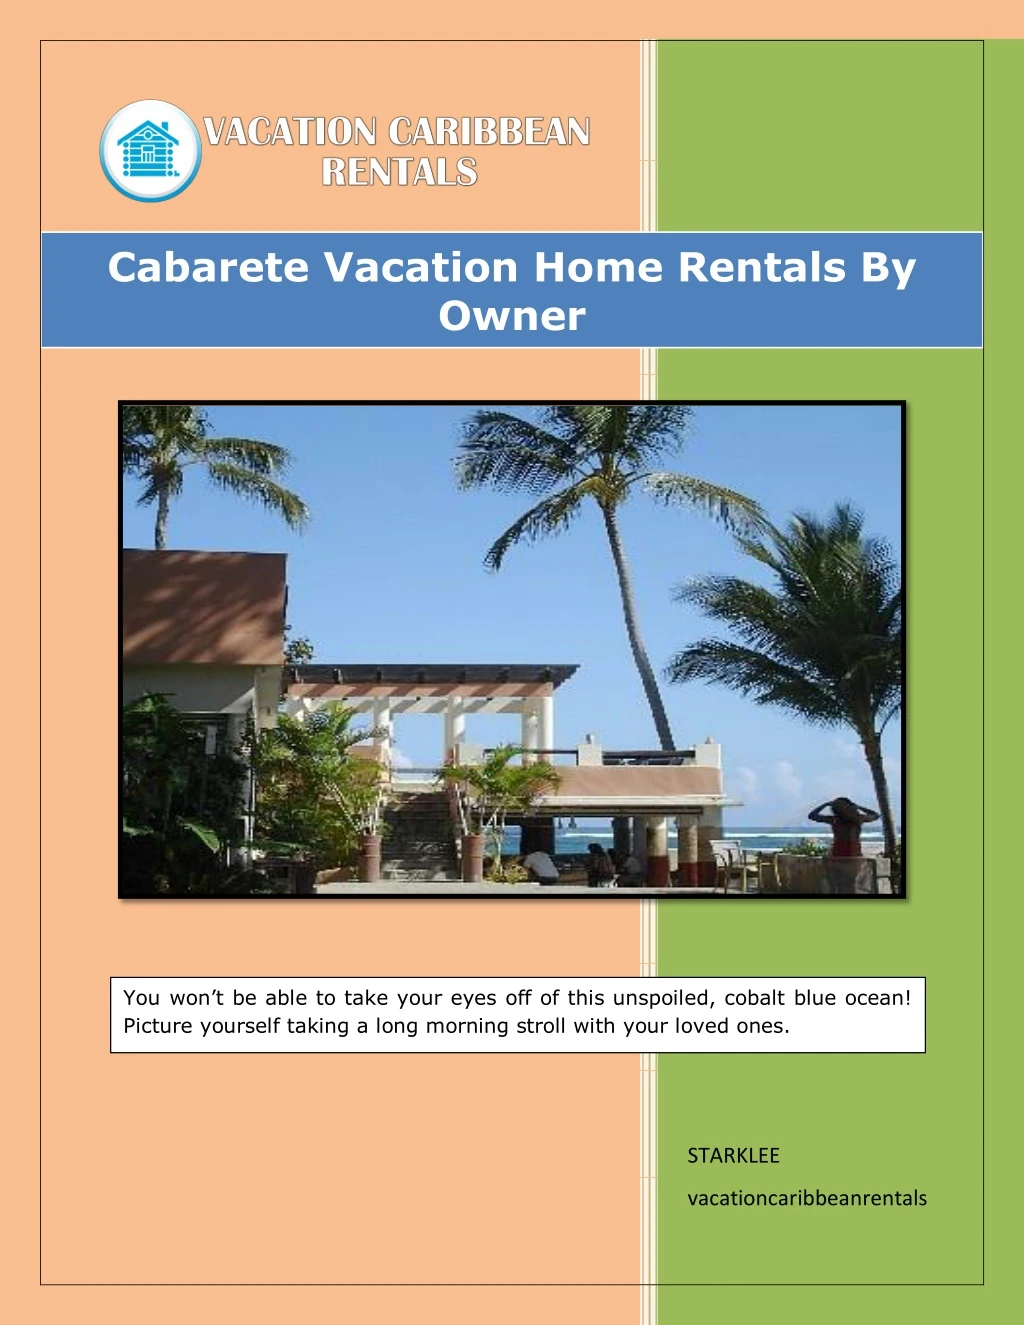 cabarete vacation home rentals by owner